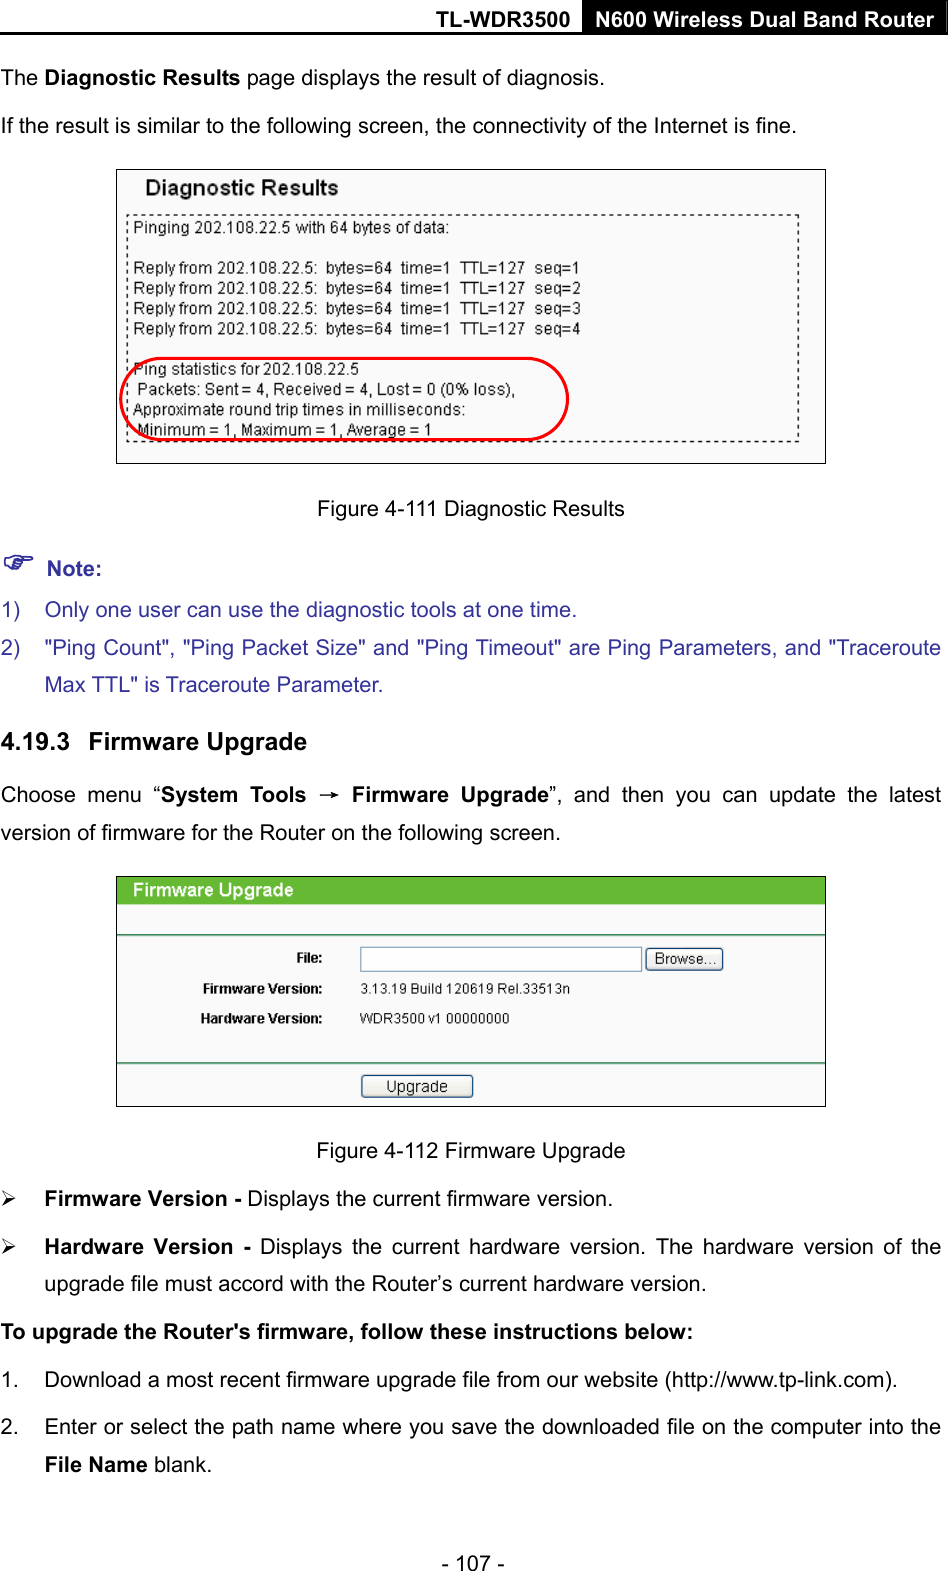 TL-WDR3500 N600 Wireless Dual Band Router - 107 - The Diagnostic Results page displays the result of diagnosis. If the result is similar to the following screen, the connectivity of the Internet is fine.  Figure 4-111 Diagnostic Results  Note: 1)  Only one user can use the diagnostic tools at one time.   2)  &quot;Ping Count&quot;, &quot;Ping Packet Size&quot; and &quot;Ping Timeout&quot; are Ping Parameters, and &quot;Traceroute Max TTL&quot; is Traceroute Parameter.   4.19.3  Firmware Upgrade Choose menu “System Tools → Firmware Upgrade”, and then you can update the latest version of firmware for the Router on the following screen.  Figure 4-112 Firmware Upgrade  Firmware Version - Displays the current firmware version.  Hardware Version - Displays the current hardware version. The hardware version of the upgrade file must accord with the Router’s current hardware version. To upgrade the Router&apos;s firmware, follow these instructions below: 1.  Download a most recent firmware upgrade file from our website (http://www.tp-link.com).  2.  Enter or select the path name where you save the downloaded file on the computer into the File Name blank.   